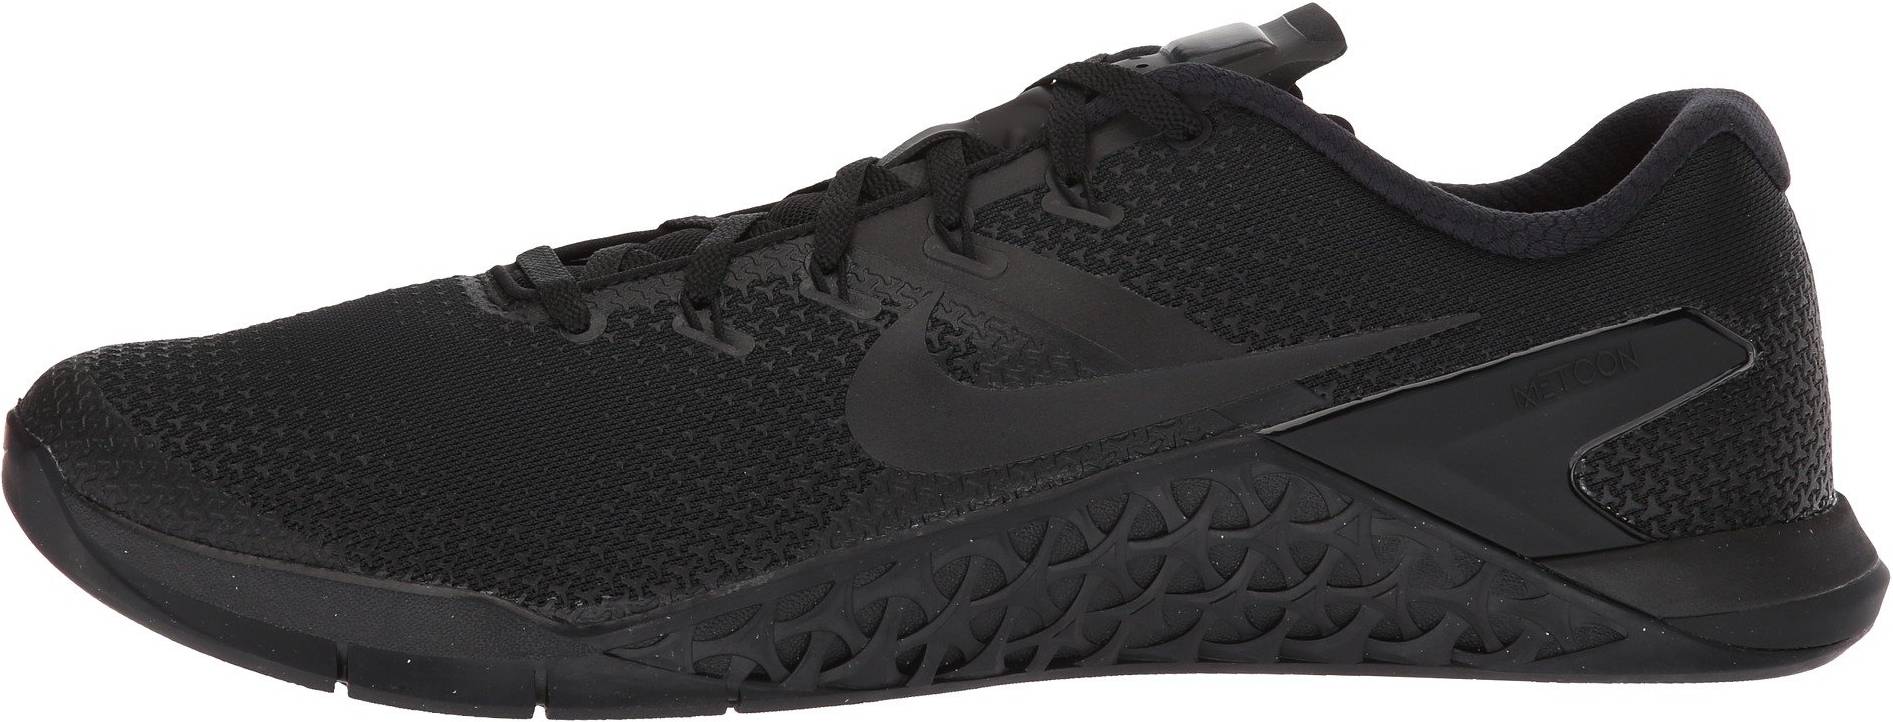 Save 47% on Nike Crossfit Shoes (17 